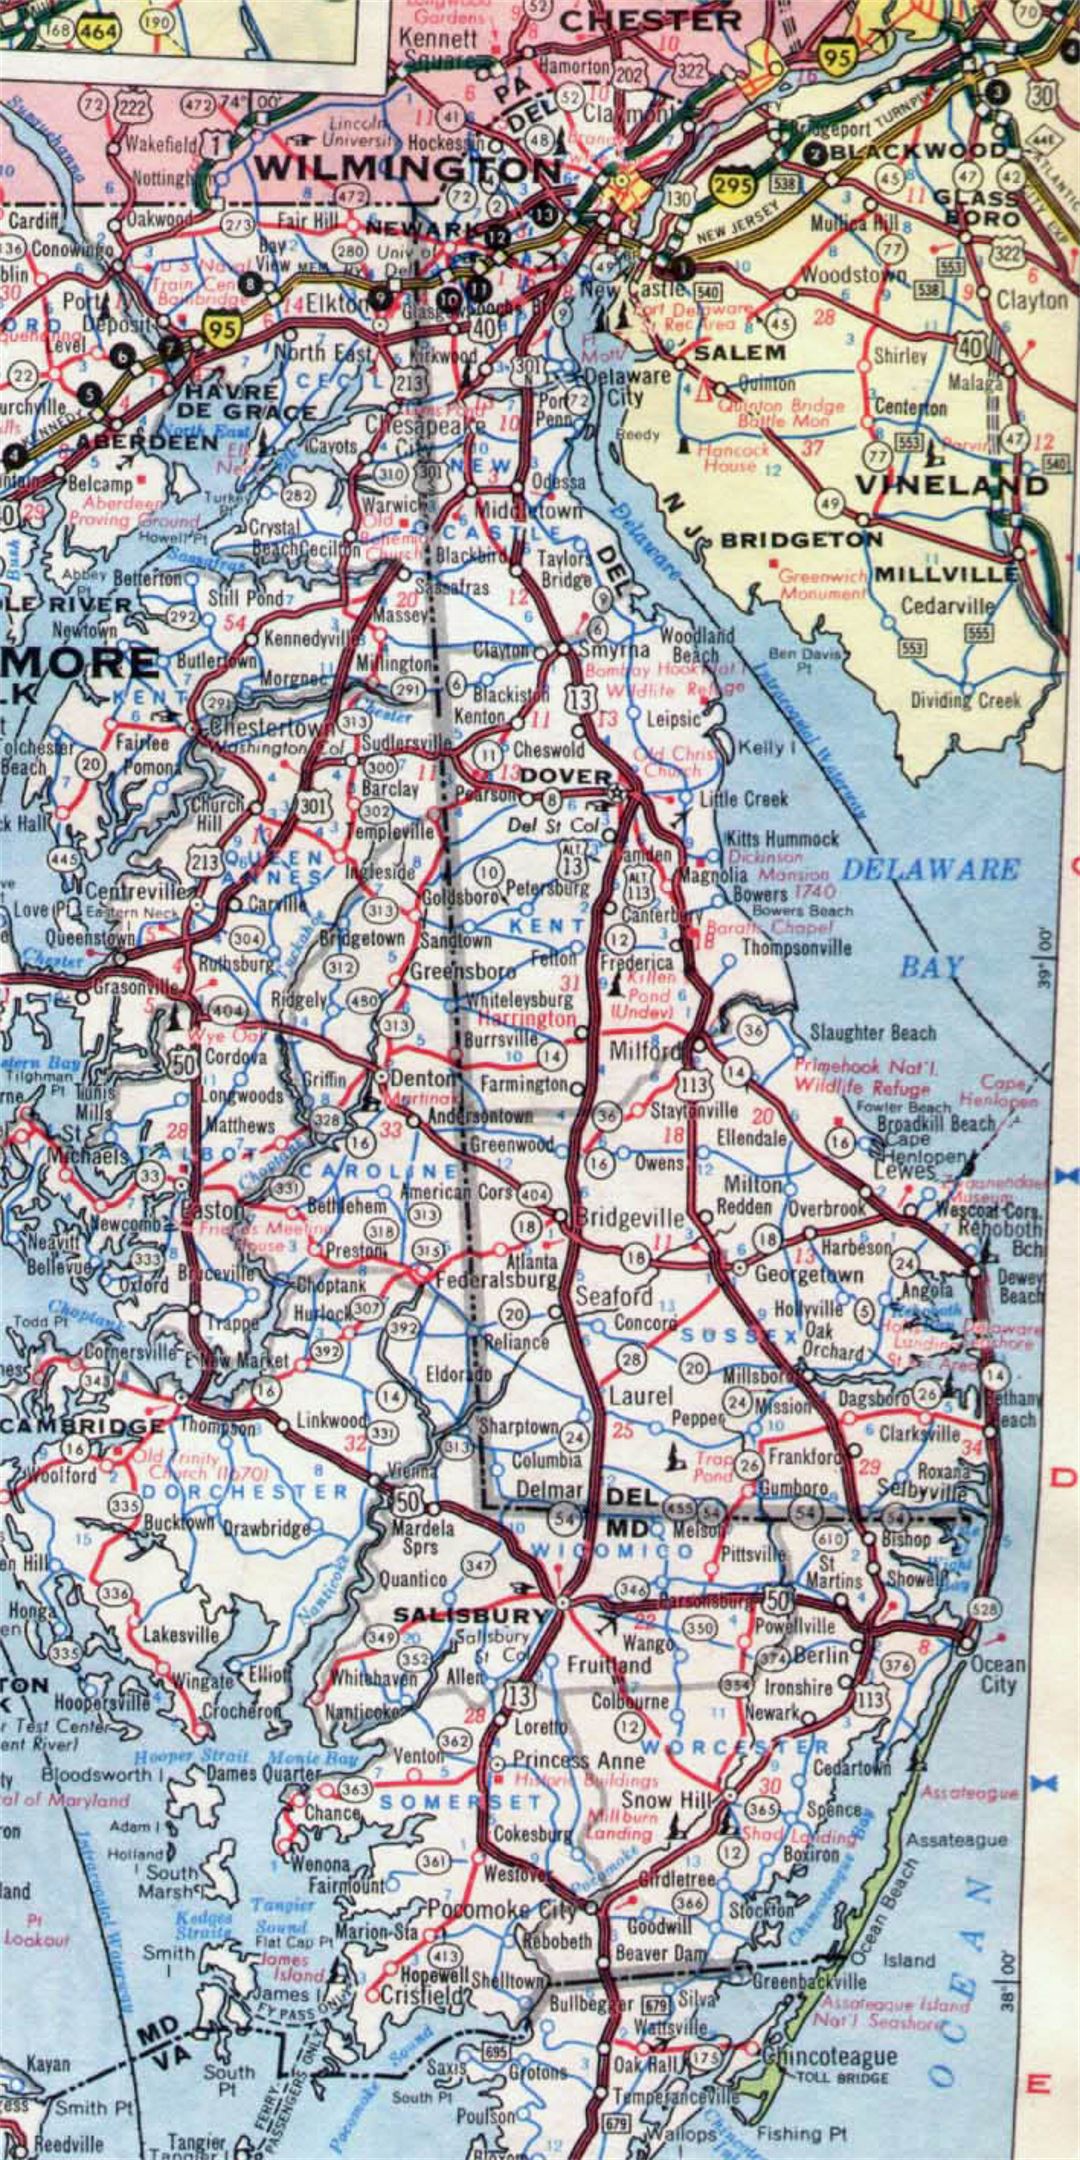 Roads and highways map of Delaware state - 1968